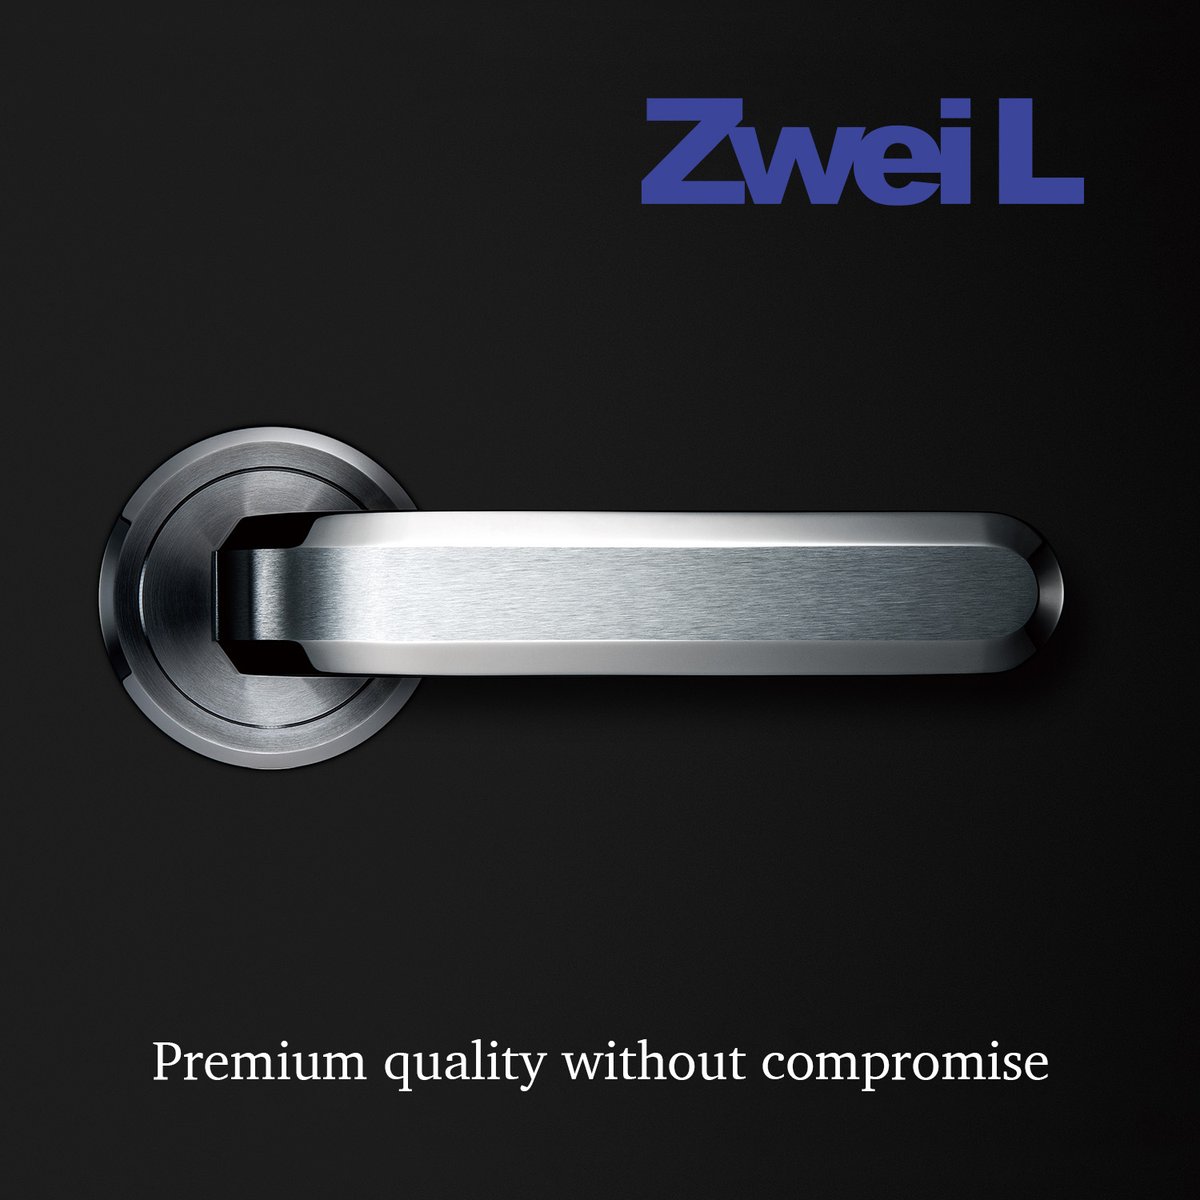 Beauty, lives in the finer details.
Zwei L is the pinnacle of stainless steel beauty.

Learn more about Zwei L:
zweil.com/index_en.html

#sugatsune #DetailsMatter